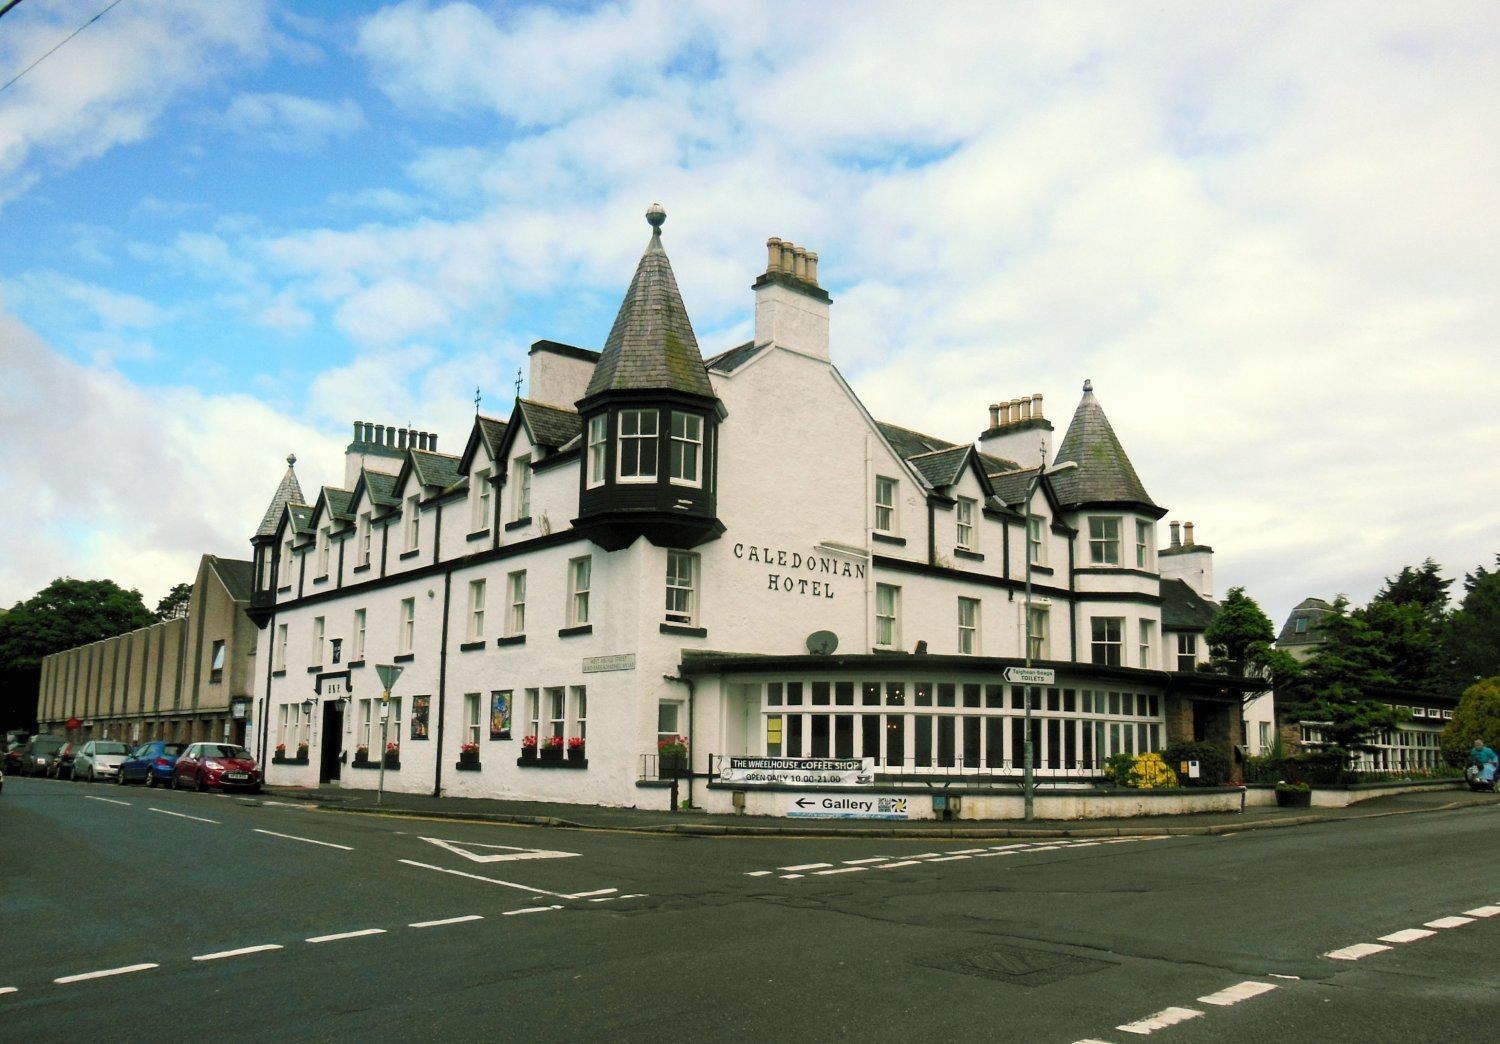 The Caledonian Hotel in Ullapool is up for sale.